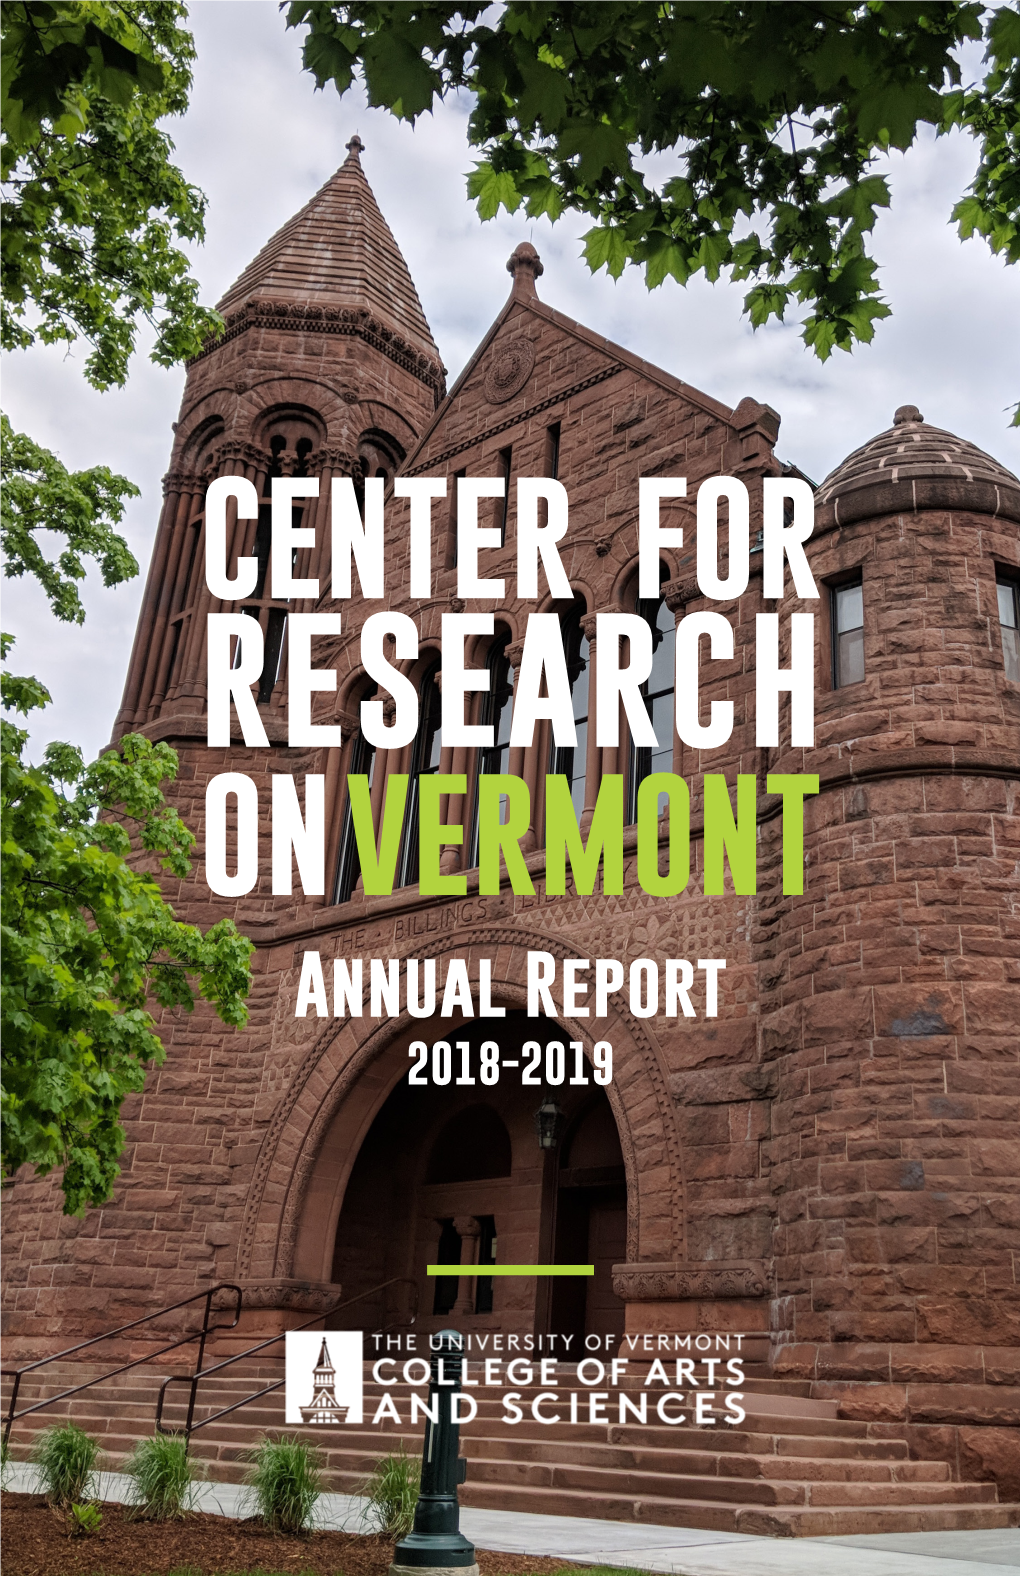 RESEARCH on VERMONT Annual Report 2018-2019 Intern Peter Ackerman (‘19), Photo by Sophie Macmillan from the Director